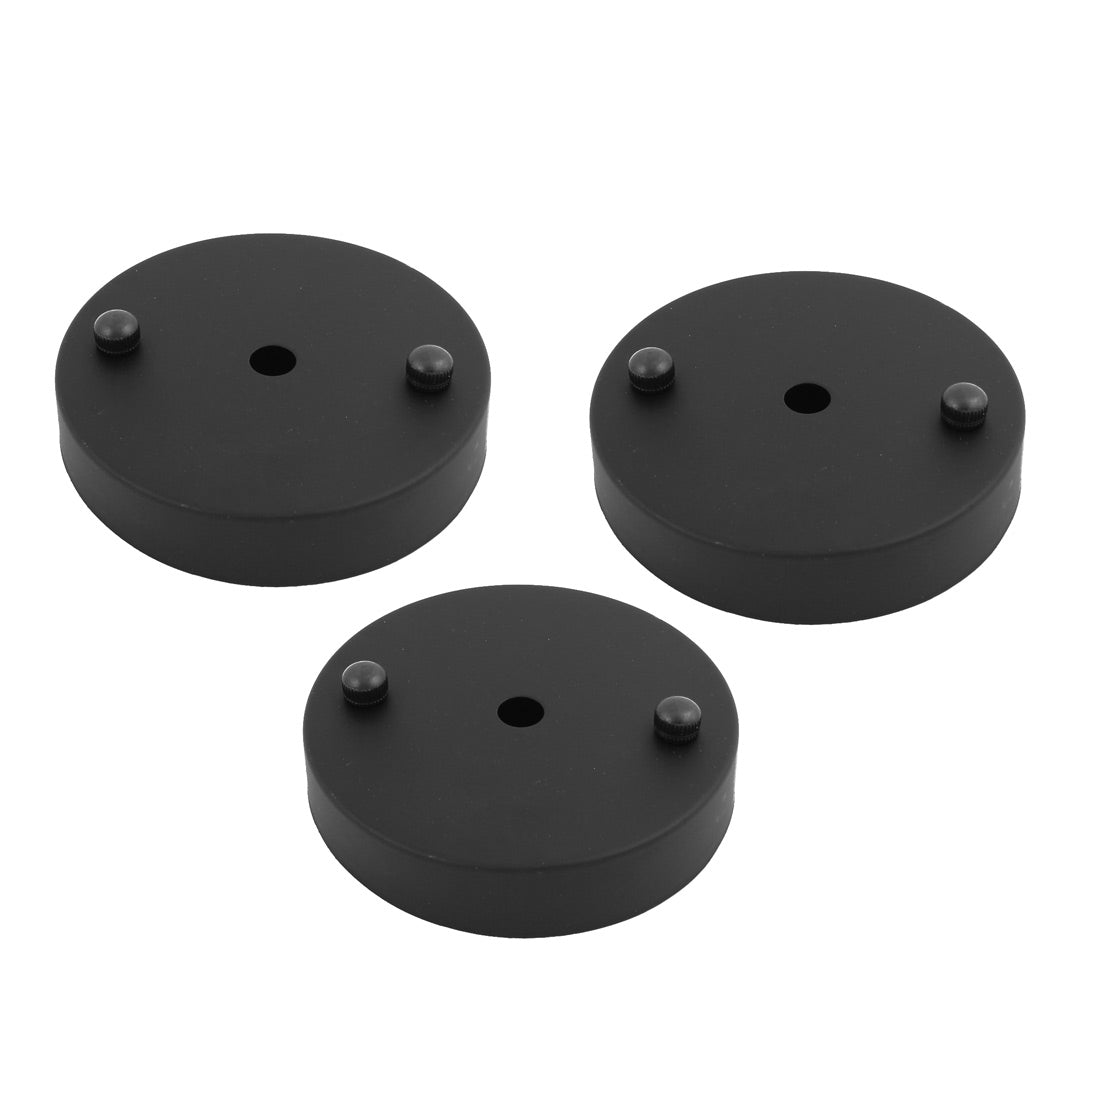 uxcell Uxcell 3Pcs Ceiling Plate Straight Edge Disc Chassis Base Pendant Light Accessories Black 100mmx20mm w Screw